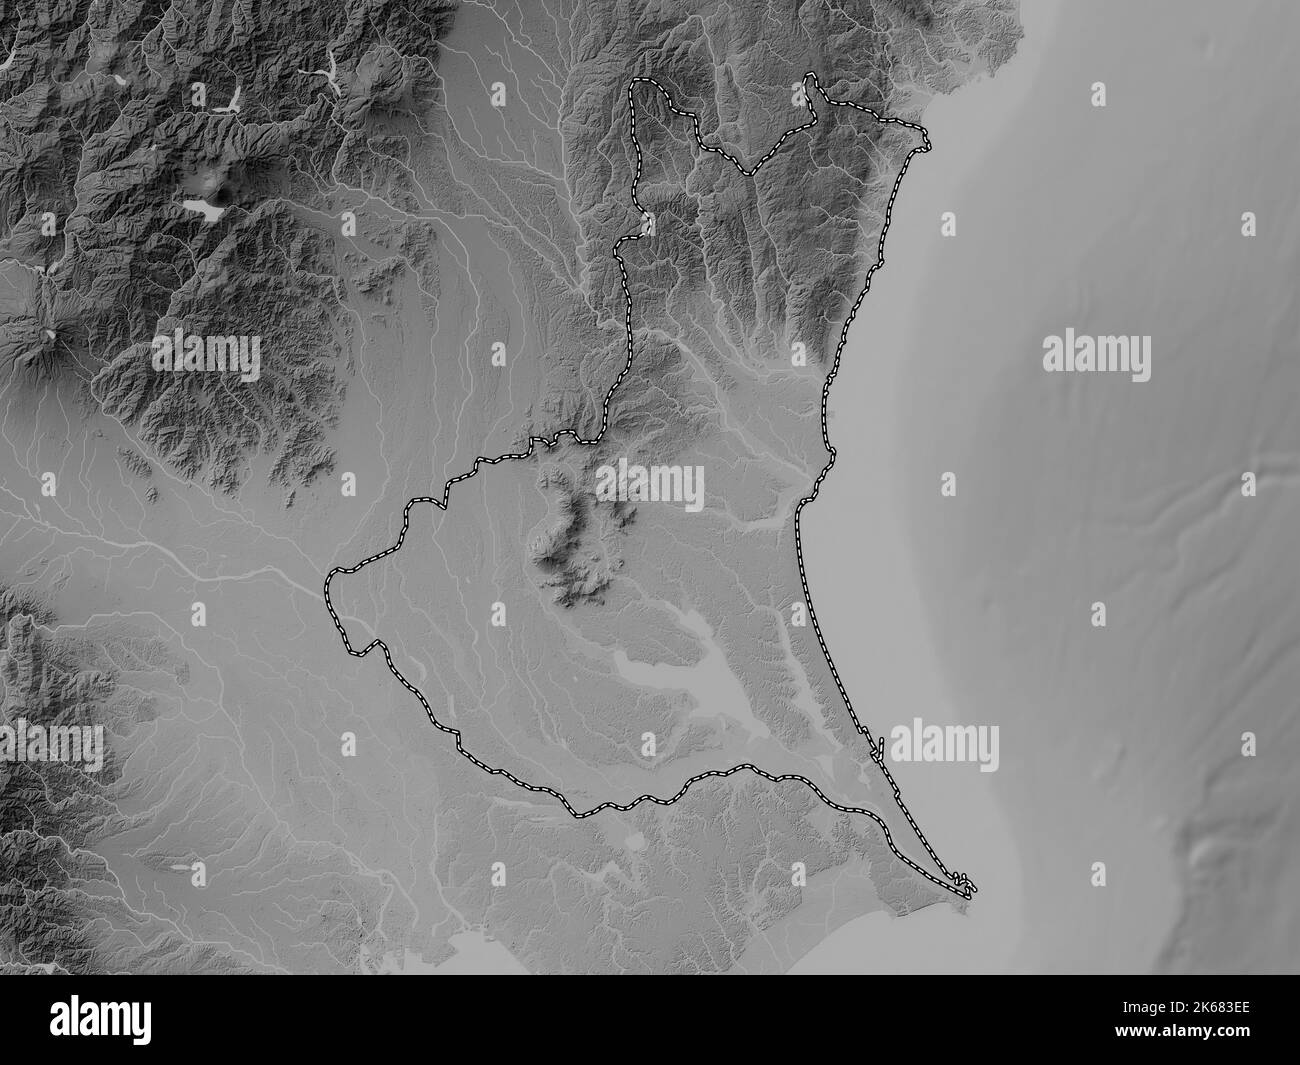 Ibaraki, prefecture of Japan. Grayscale elevation map with lakes and rivers Stock Photo